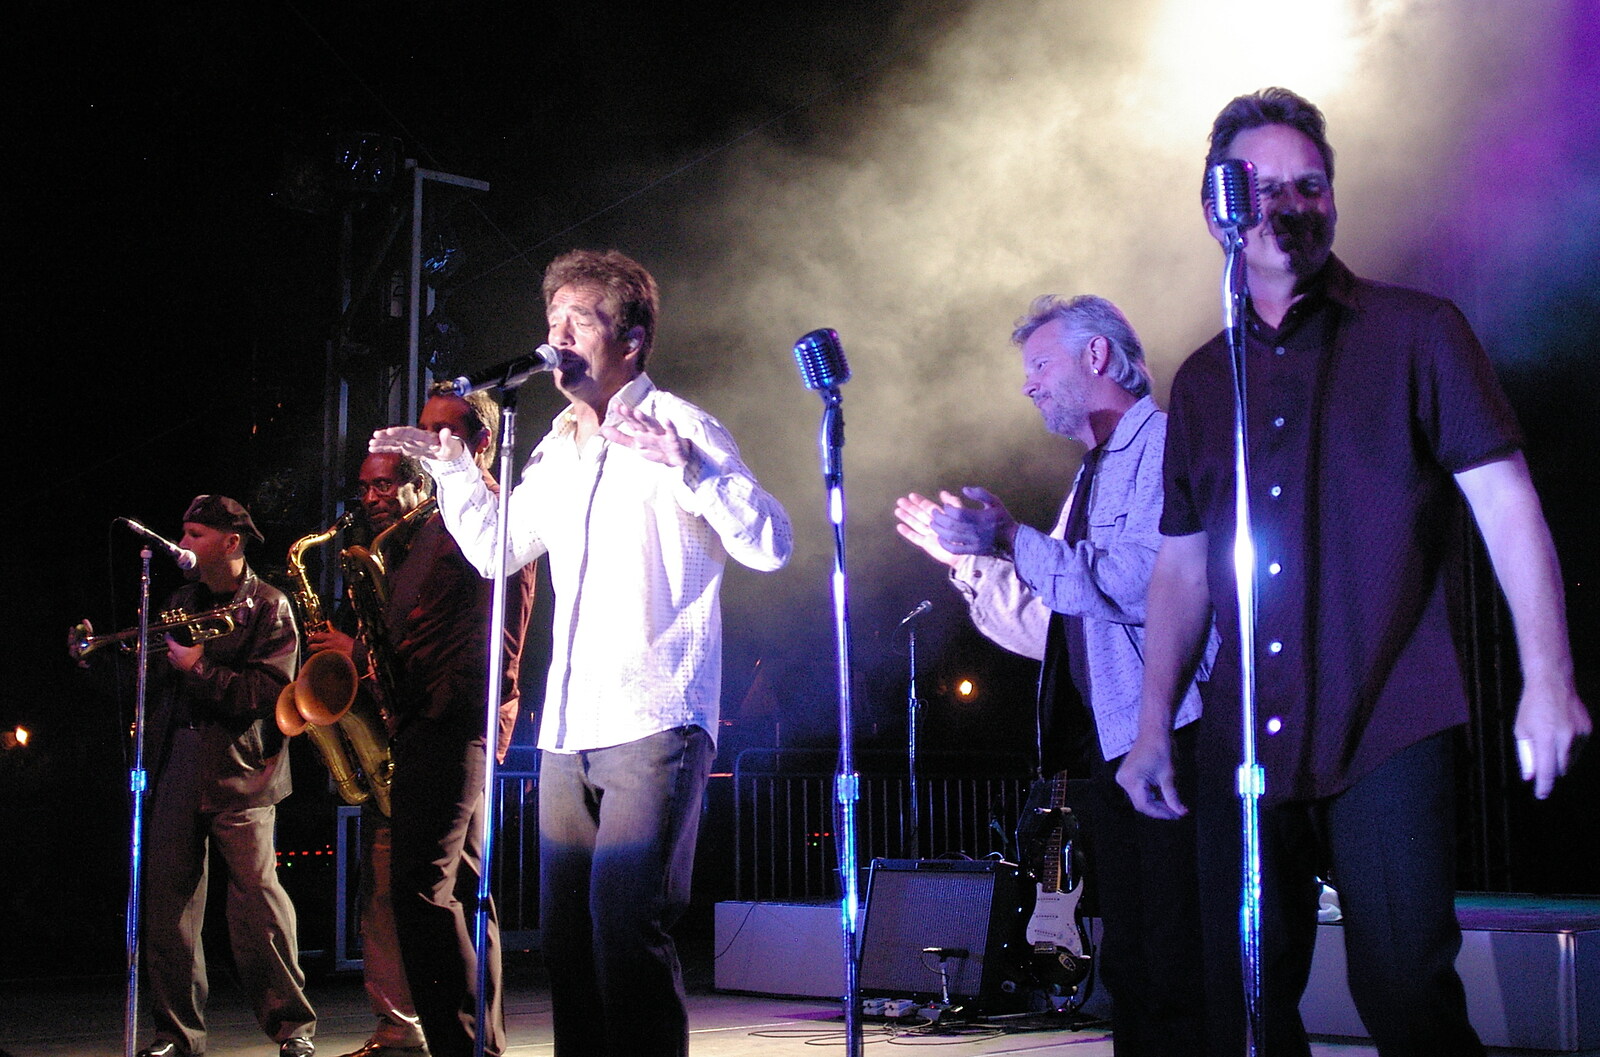 Huey Lewis and the News from BREW Fest and Huey Lewis and the News, Balboa Park, San Diego, California - 2nd June 2005